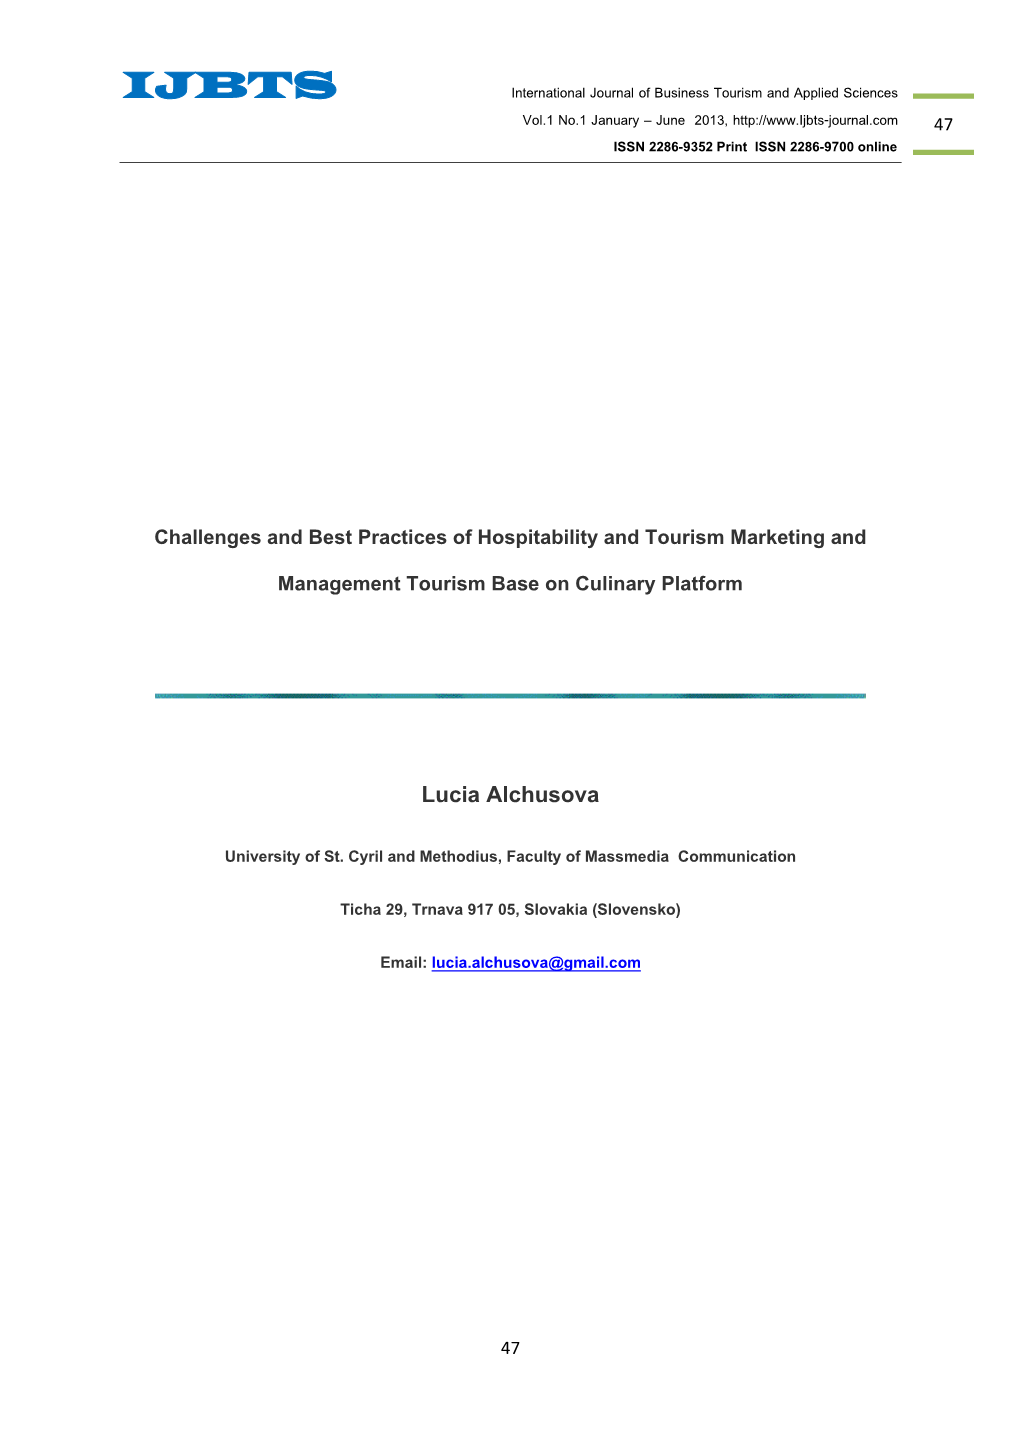 Challenges and Best Practices of Hospitability and Tourism Marketing and Management Tourism Base on Culinary Platform